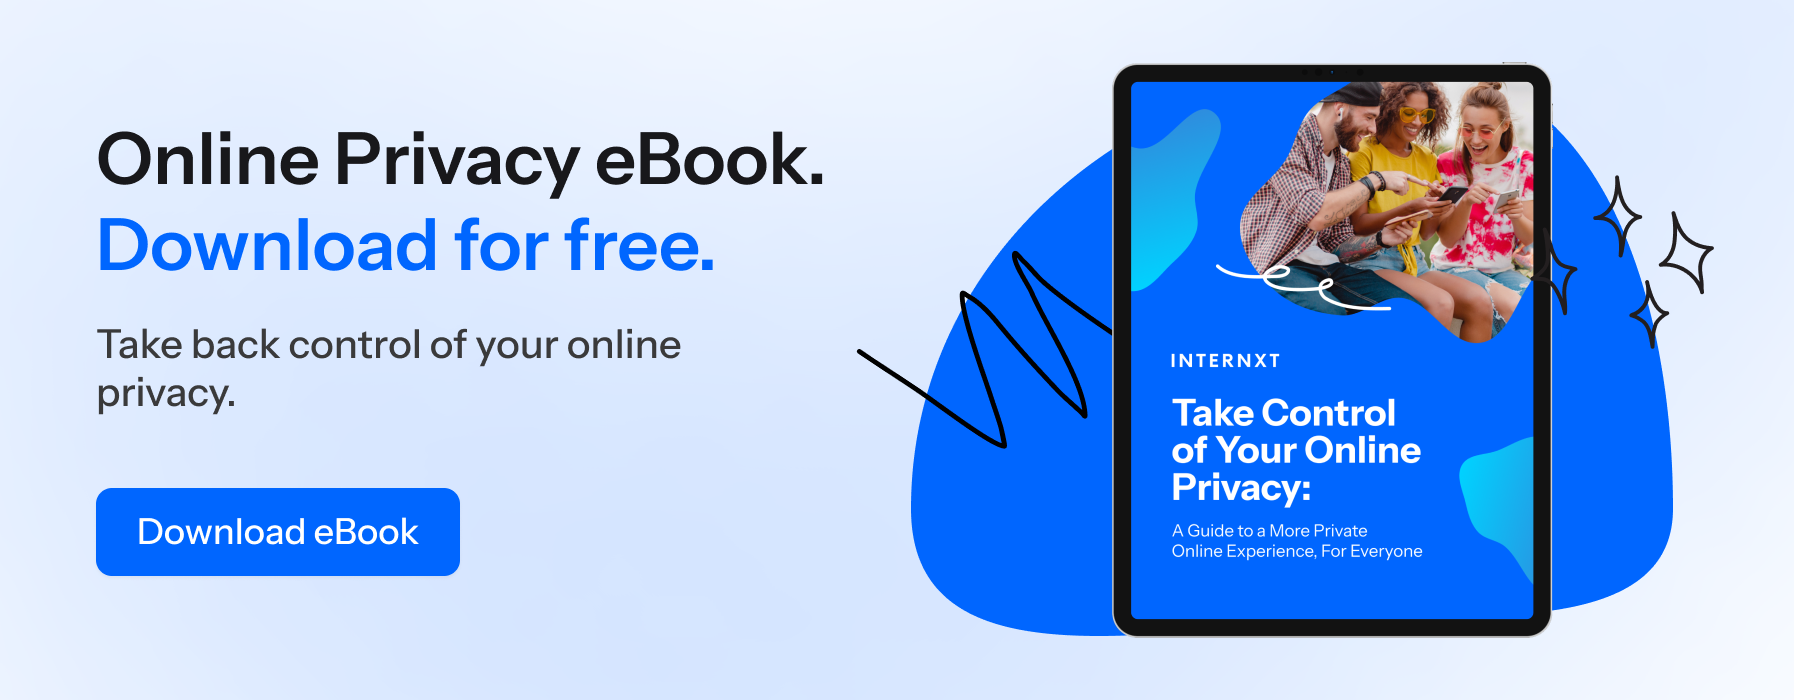 Internxt online privacy eBook helps you stay safe online.